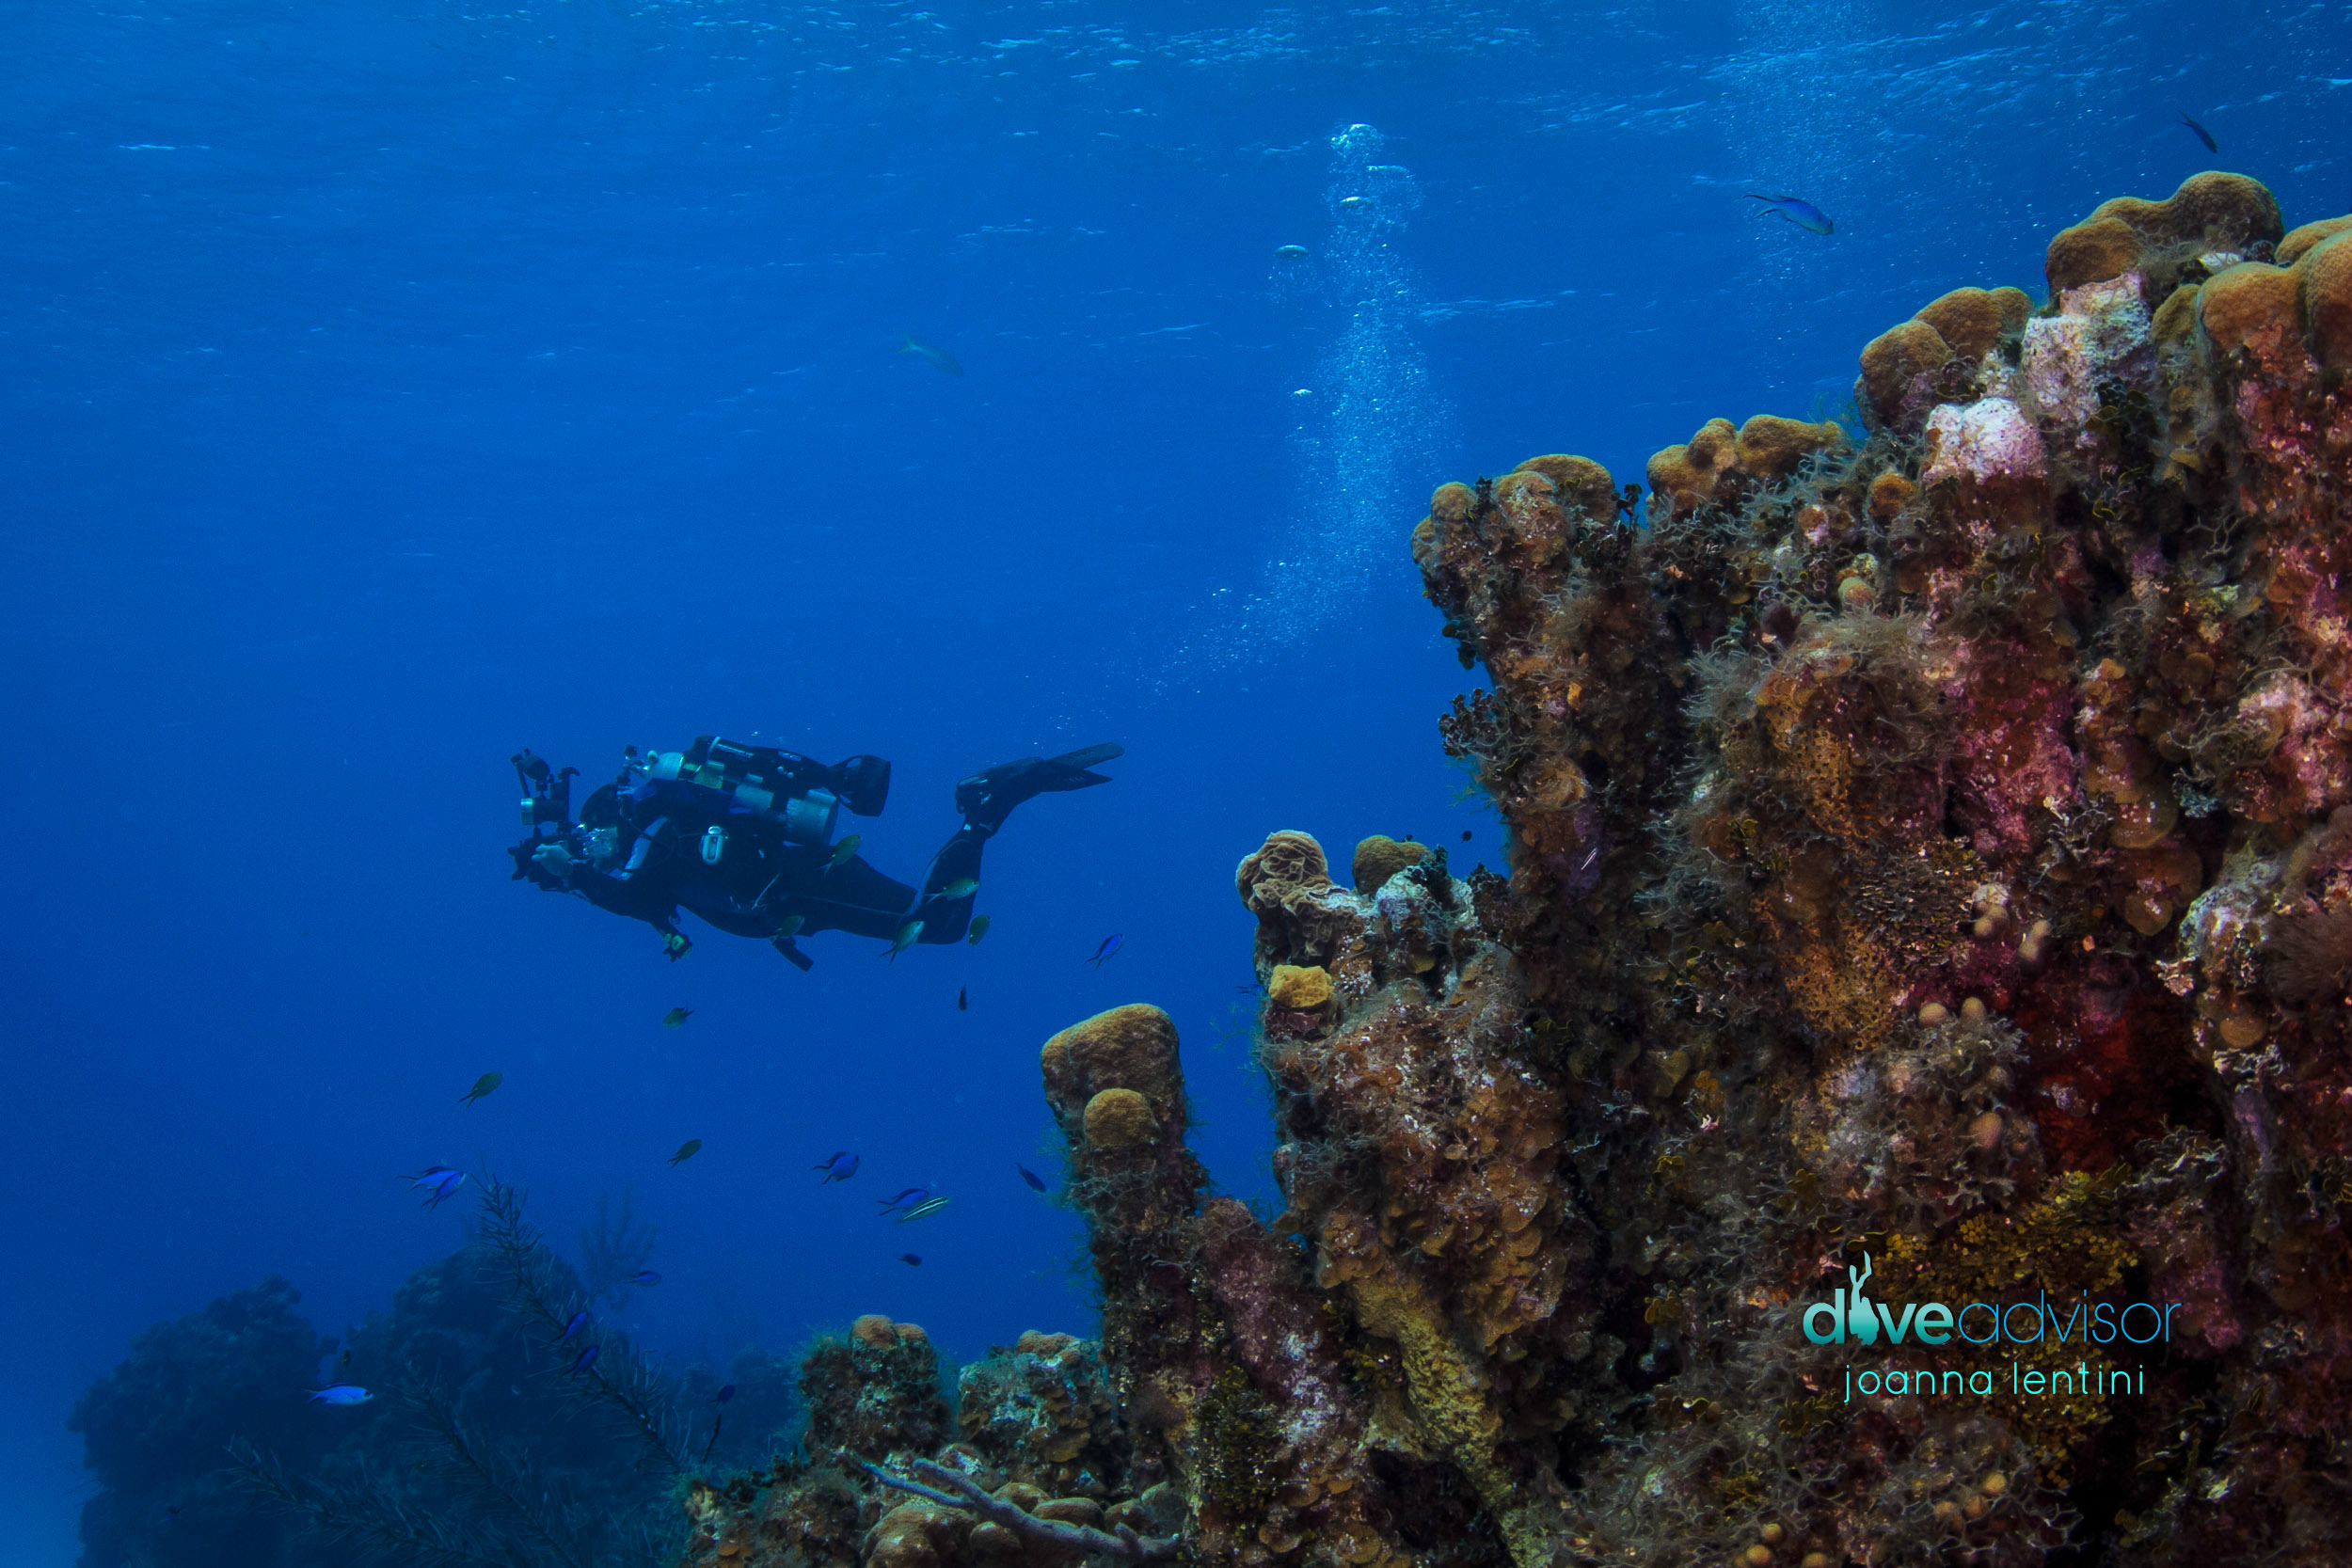 Zipping around the reef with a diver propulsion vehicle in Little Cayman, Cayman Islands